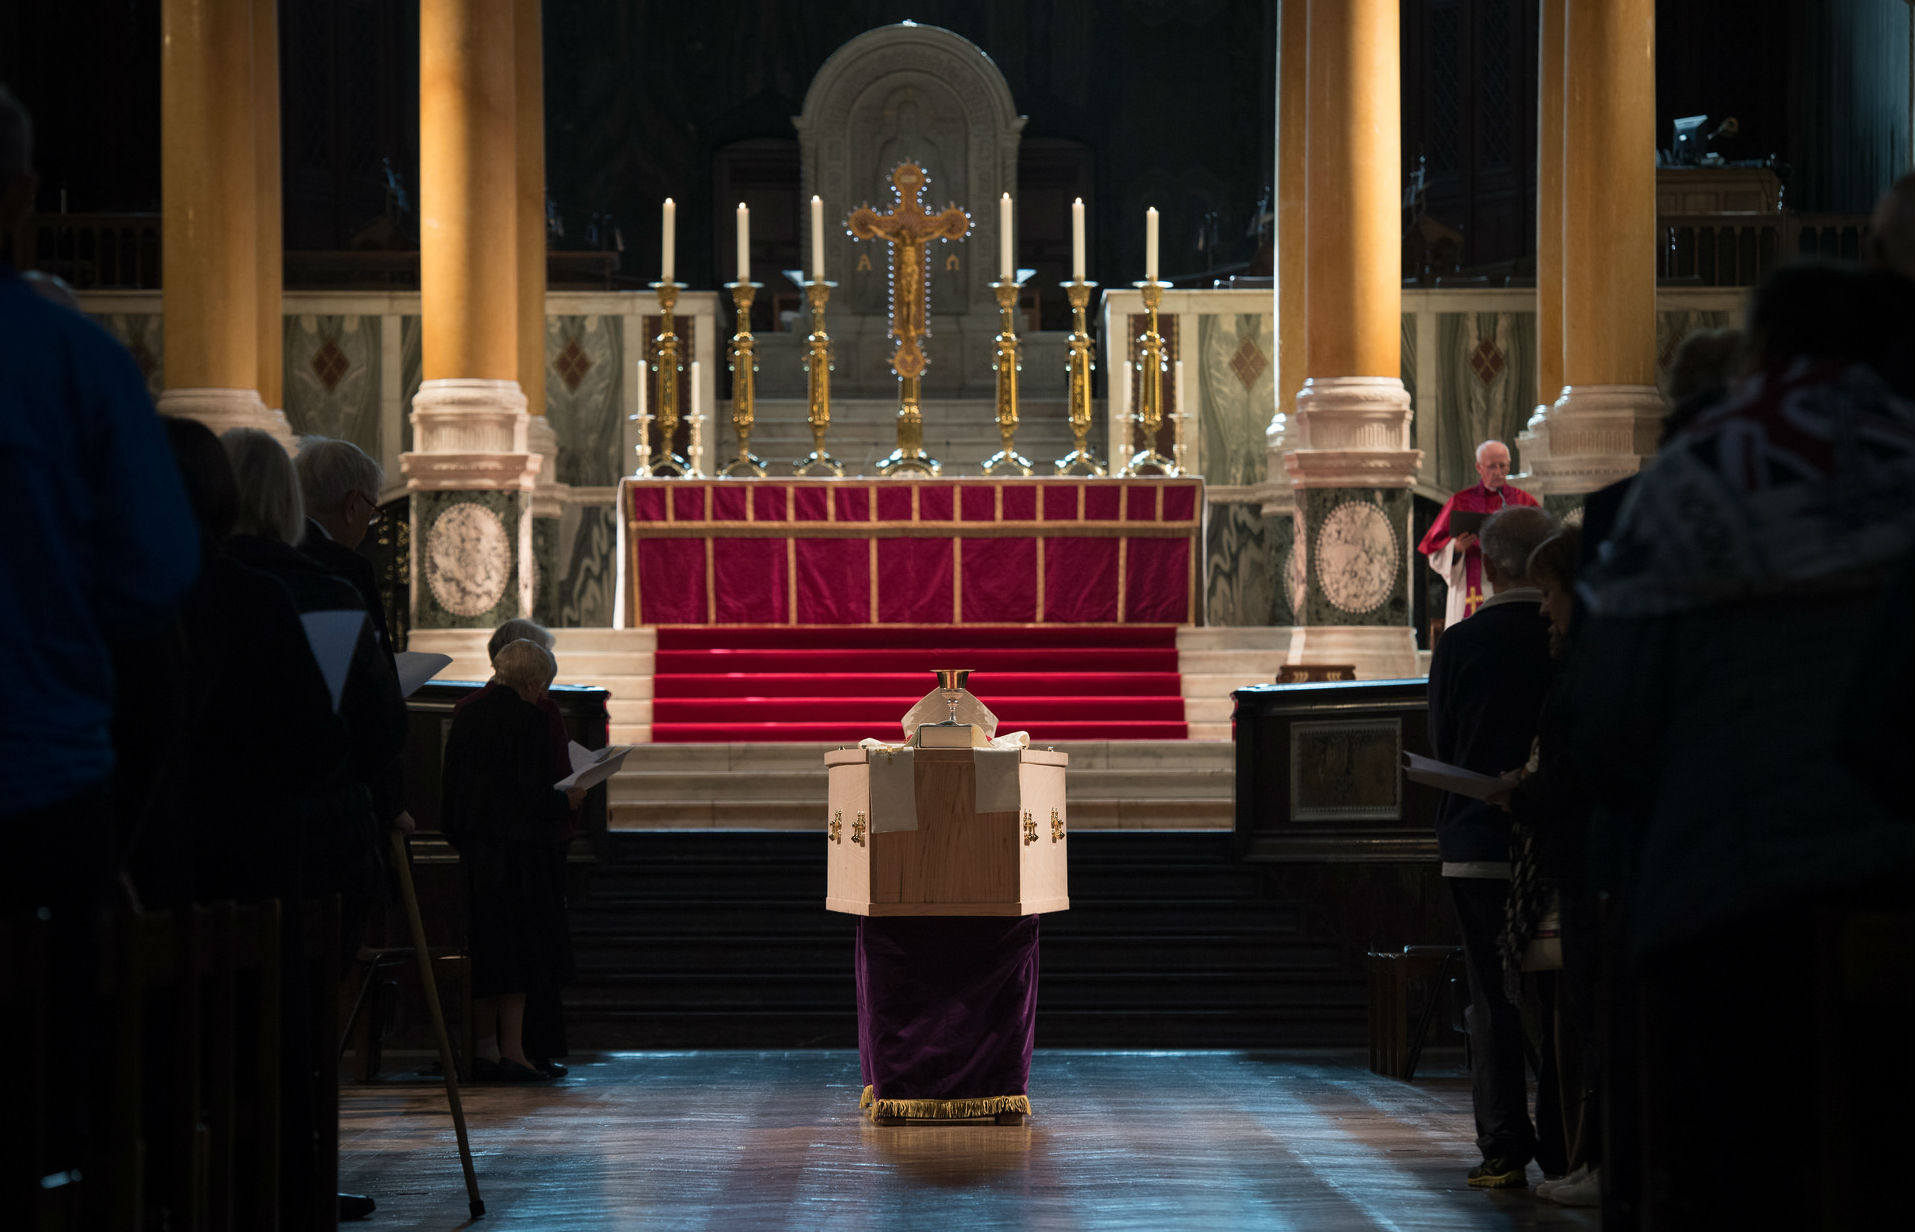 Body of Cardinal Cormac Murphy-O’Connor received into Westminster Cathedral, ahead of funeral